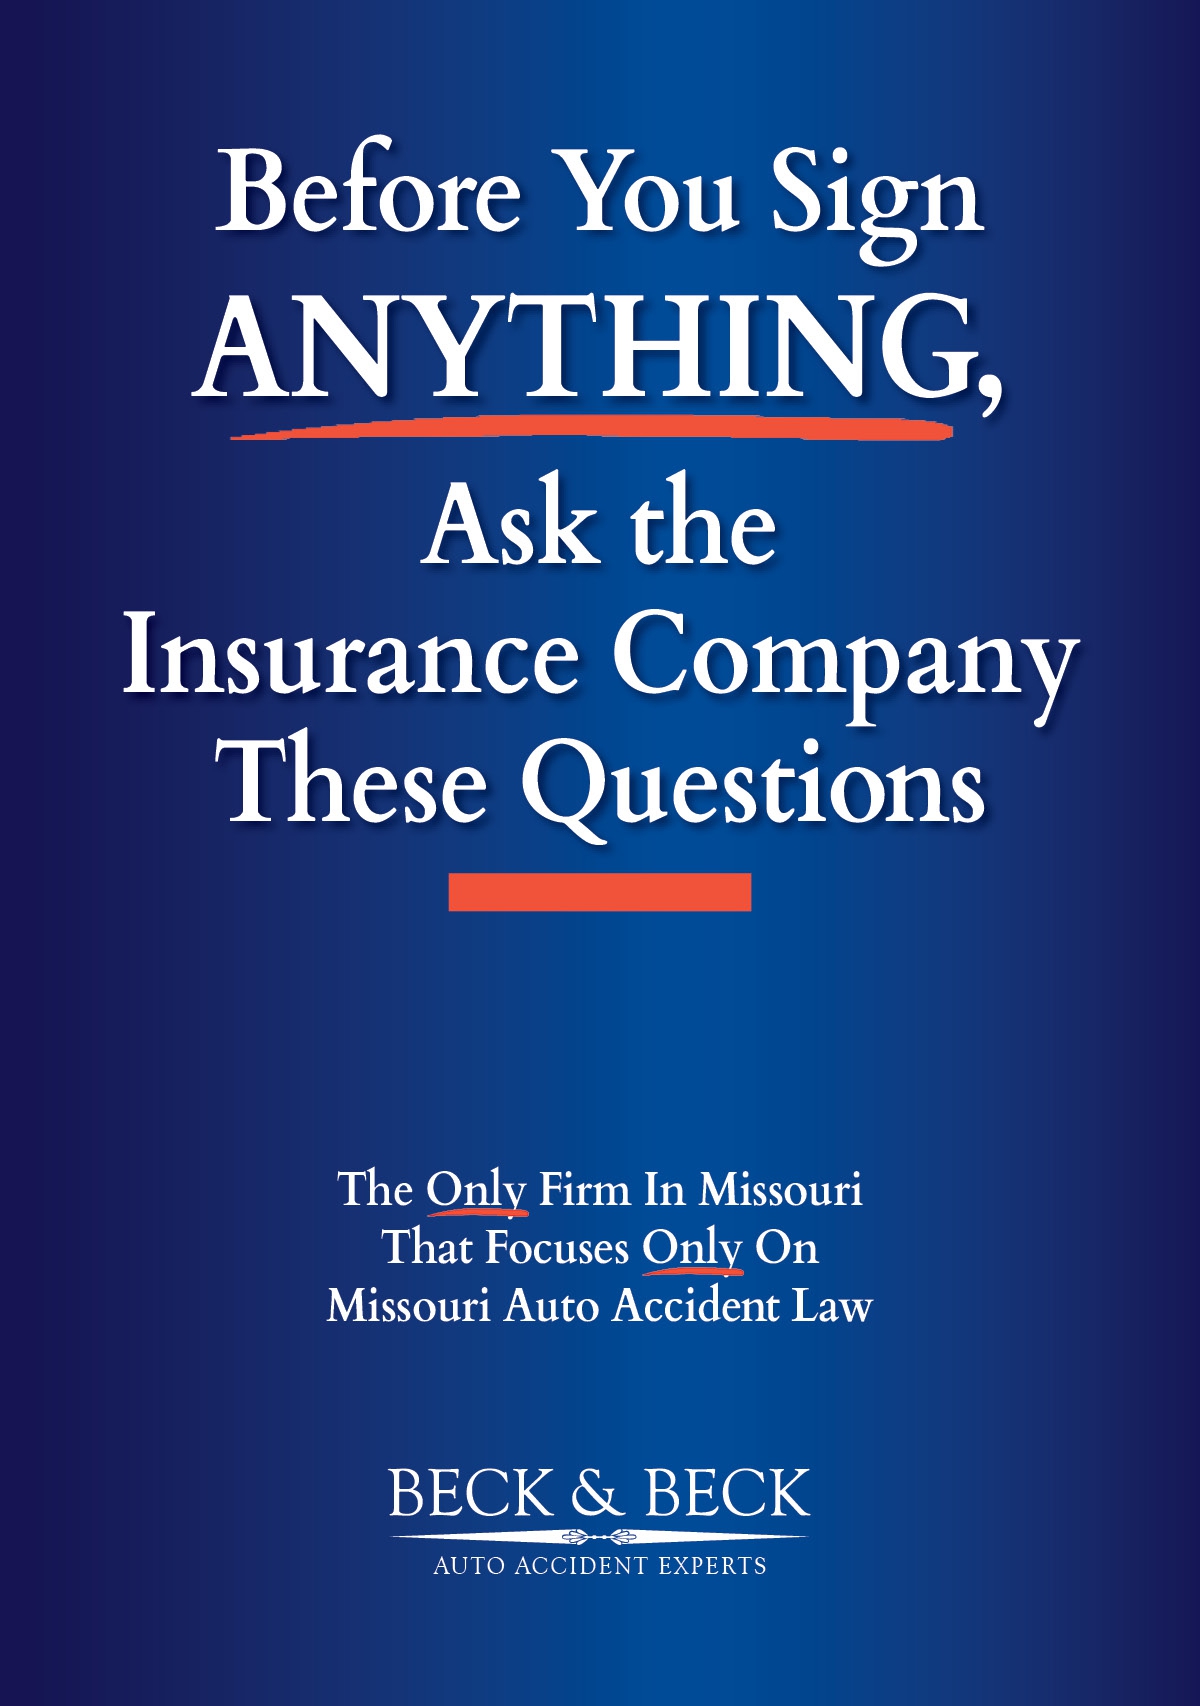 10 Questions to Ask Your Insurance Company Before You Sign